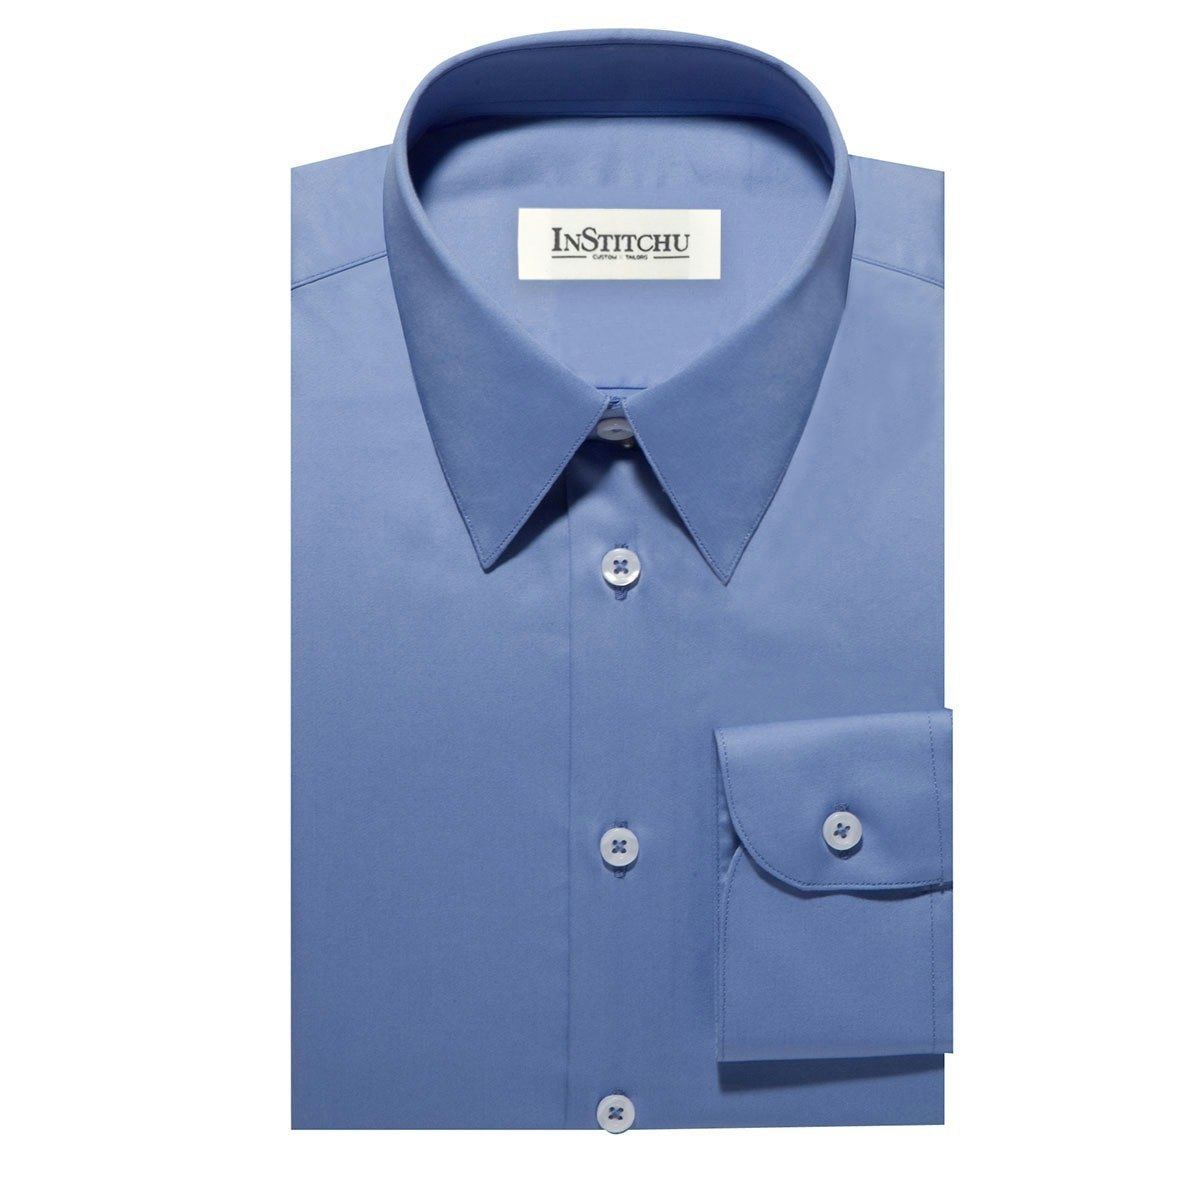 InStitchu Collection The Coin Blue Shirt